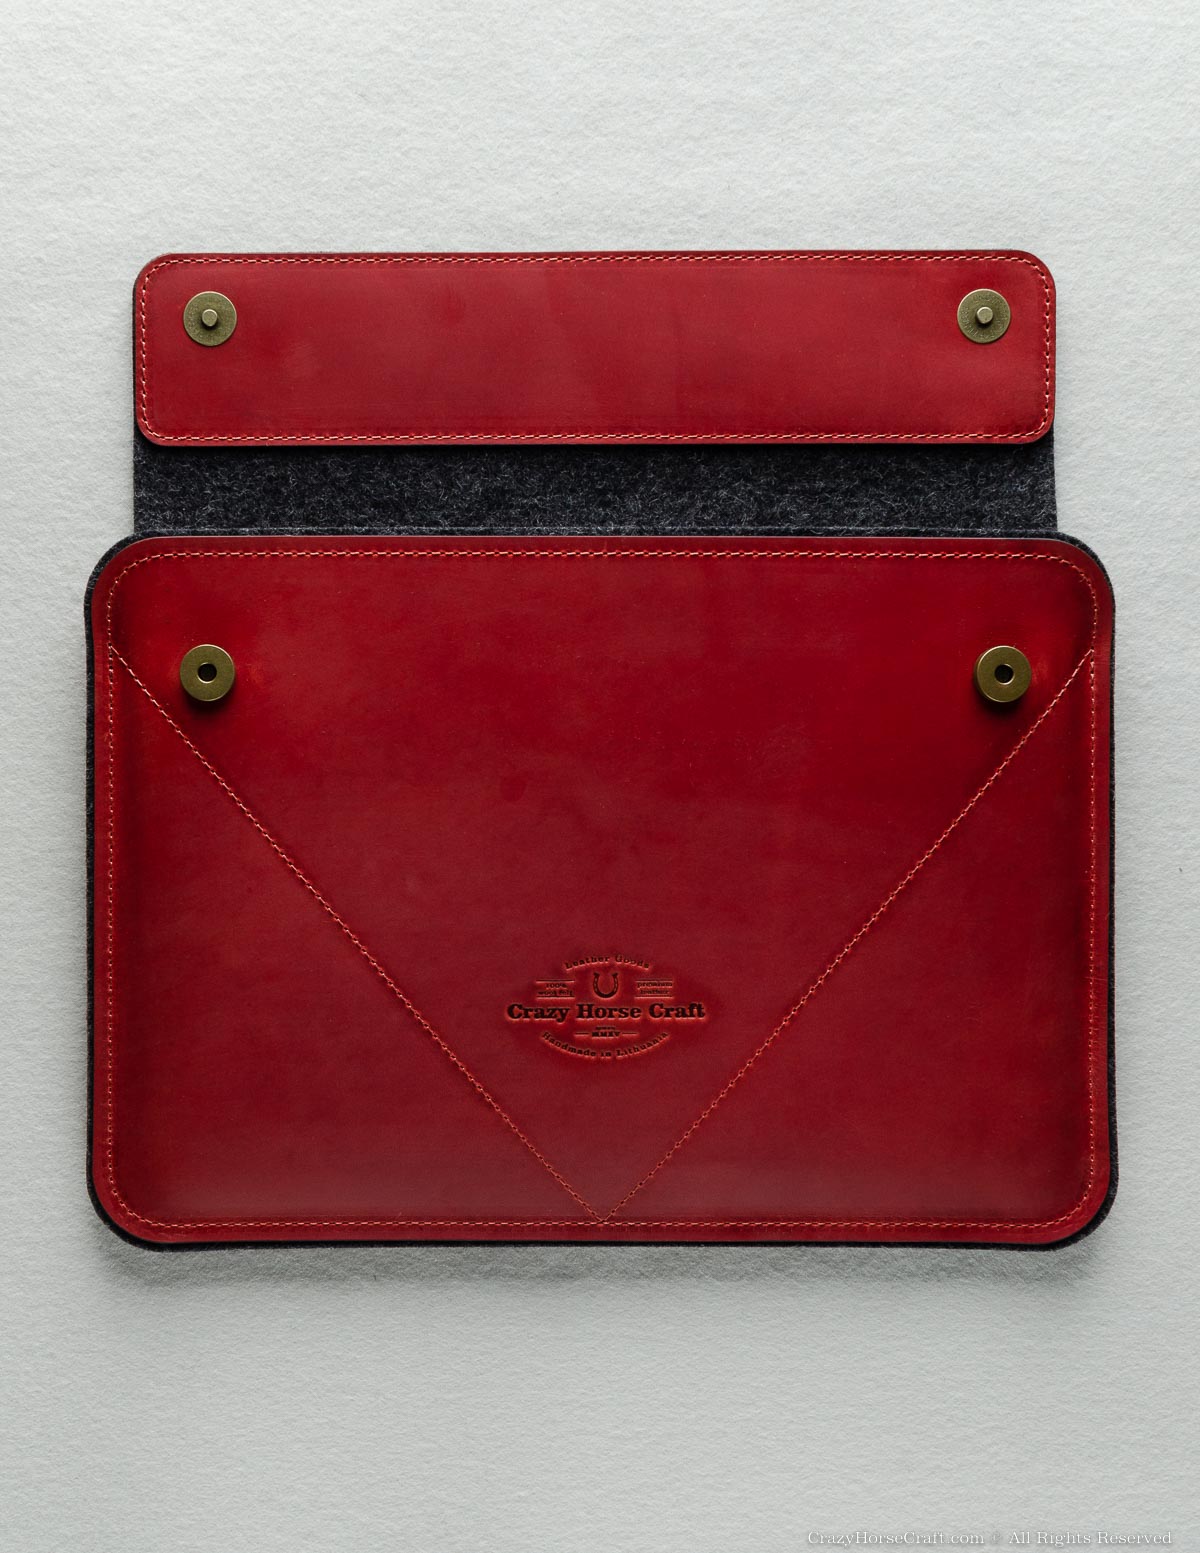 MegaGear Fine Leather and Fleece Sleeve Bag for MacBook Pro MacBook 16 inch / Red